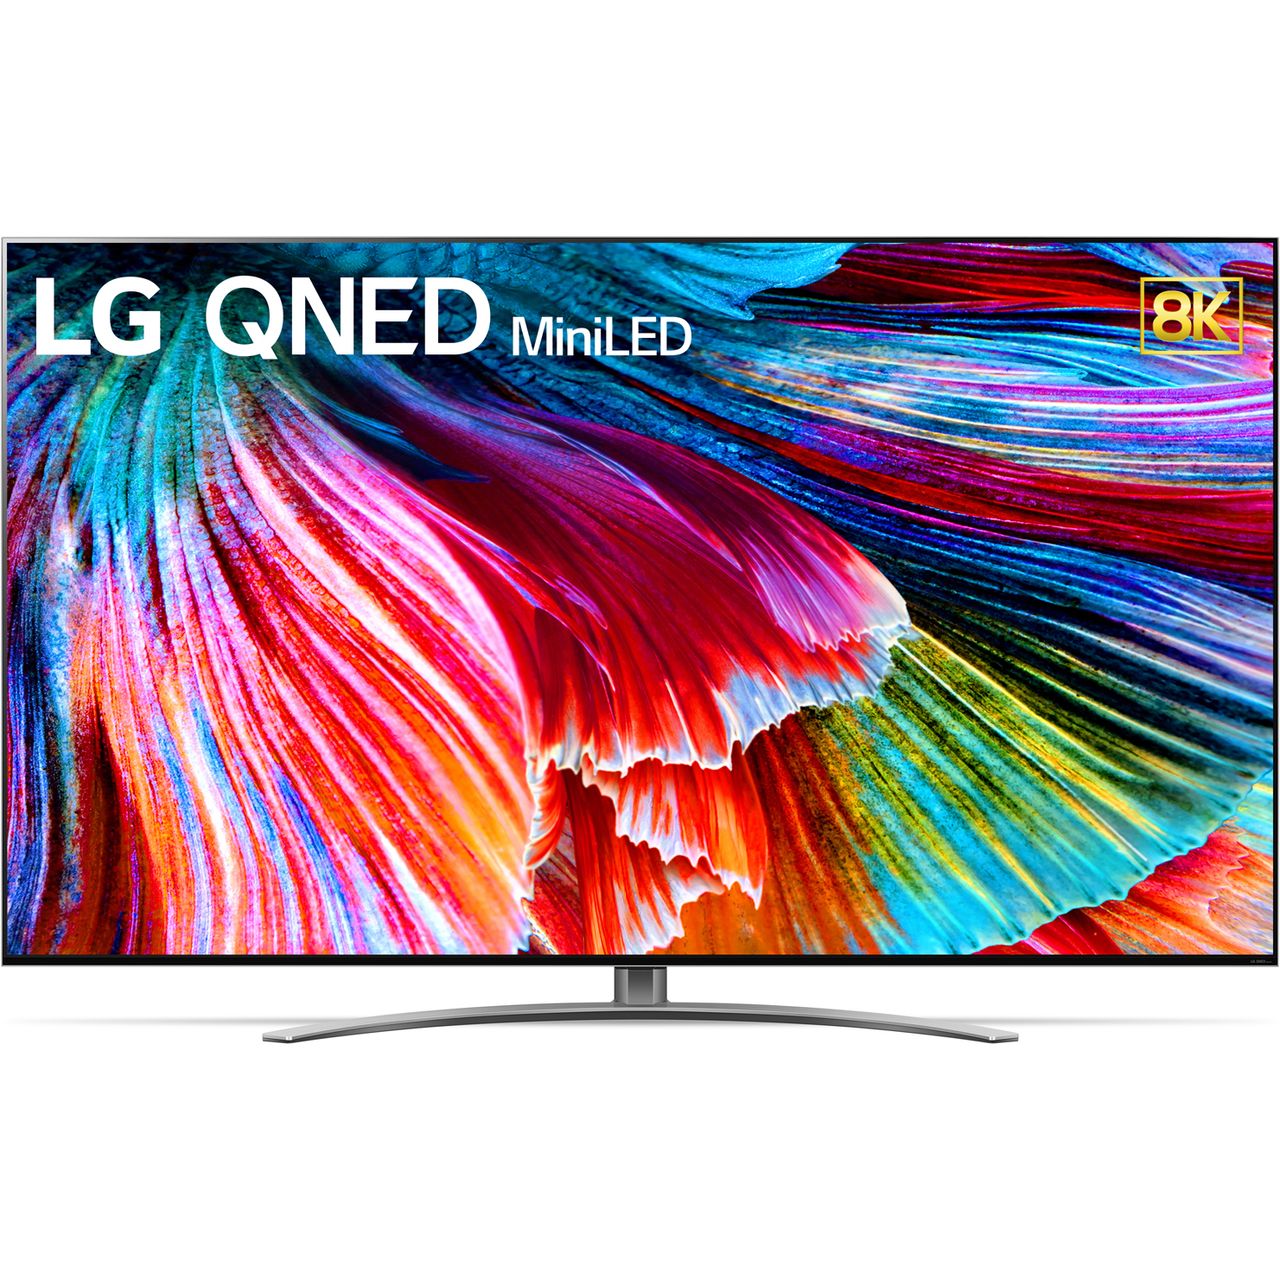 LG QNED99-Serie 75QNED999PB Fernseher - Schwarz